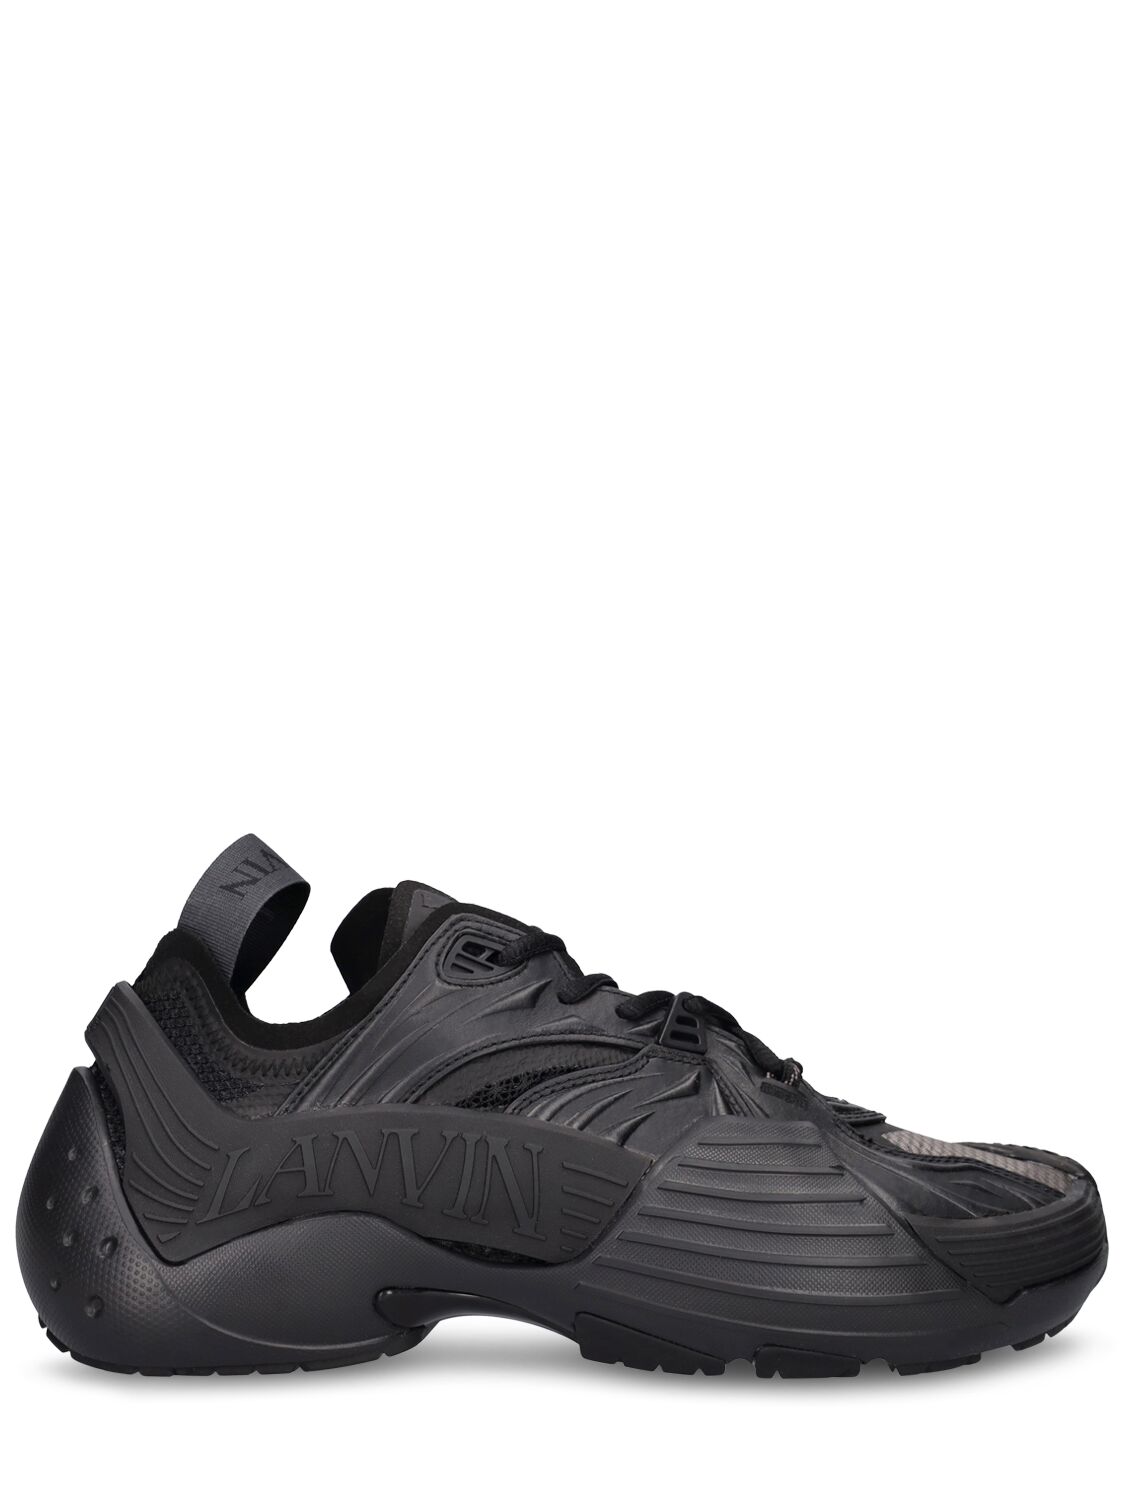 Image of Lanvin Flash-x Poly Sneakers